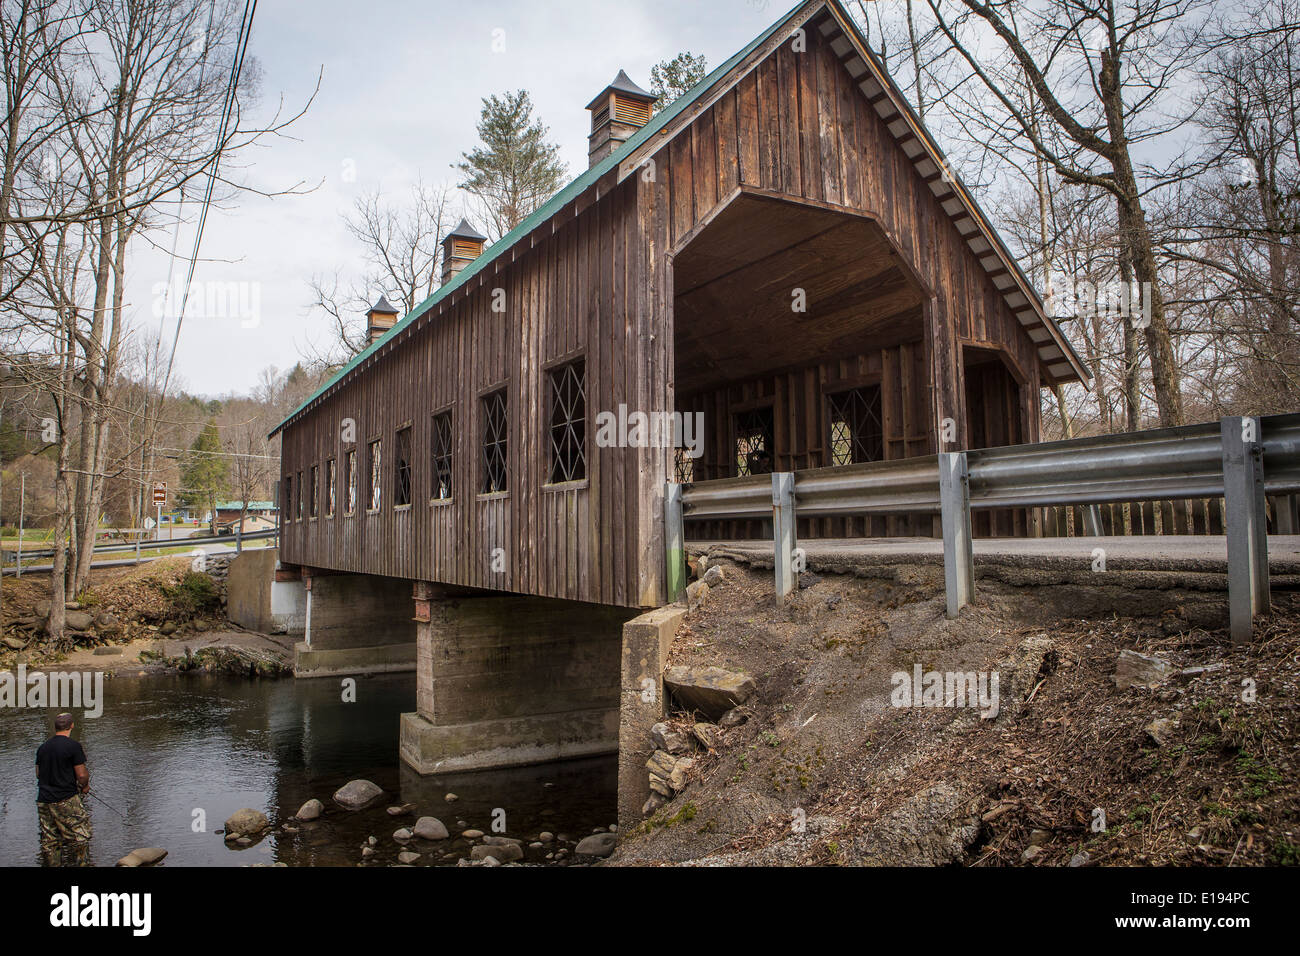 A man fishes on Little Pigeon River, by the Emerts Cove Covered Bridge in Pittman Center, Tennessee Stock Photo